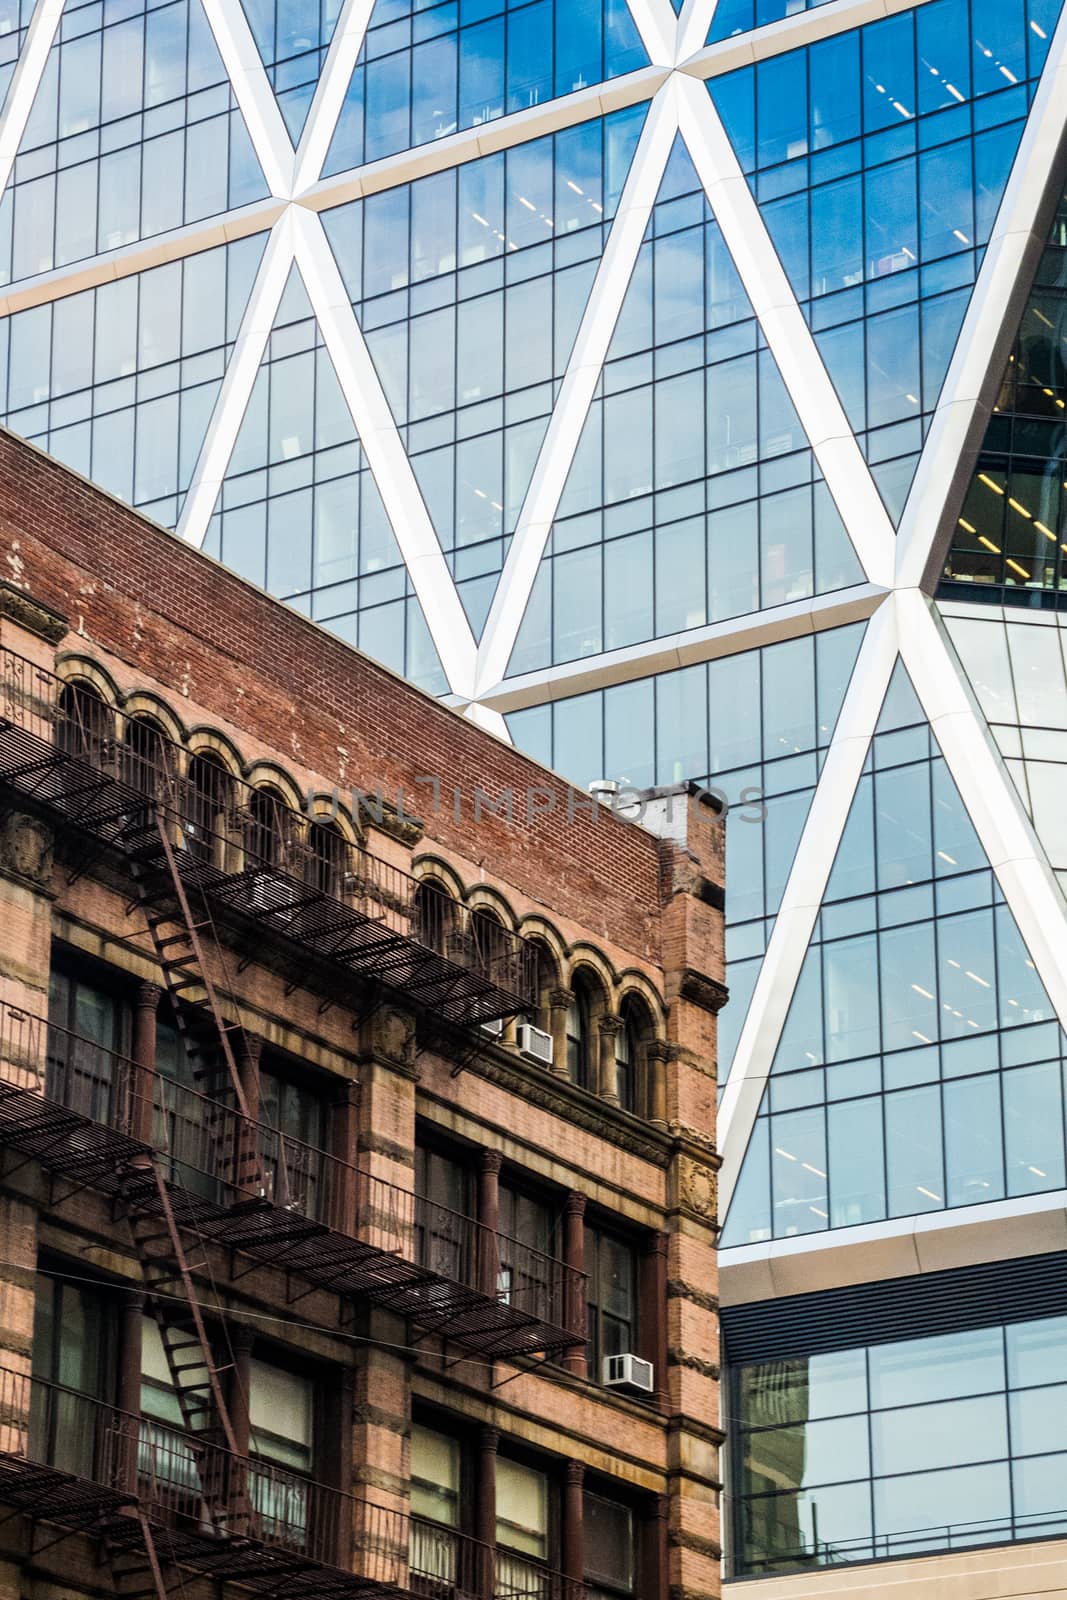 Contrast of old brick building and modern skyscraper with glass  by MXW_Stock